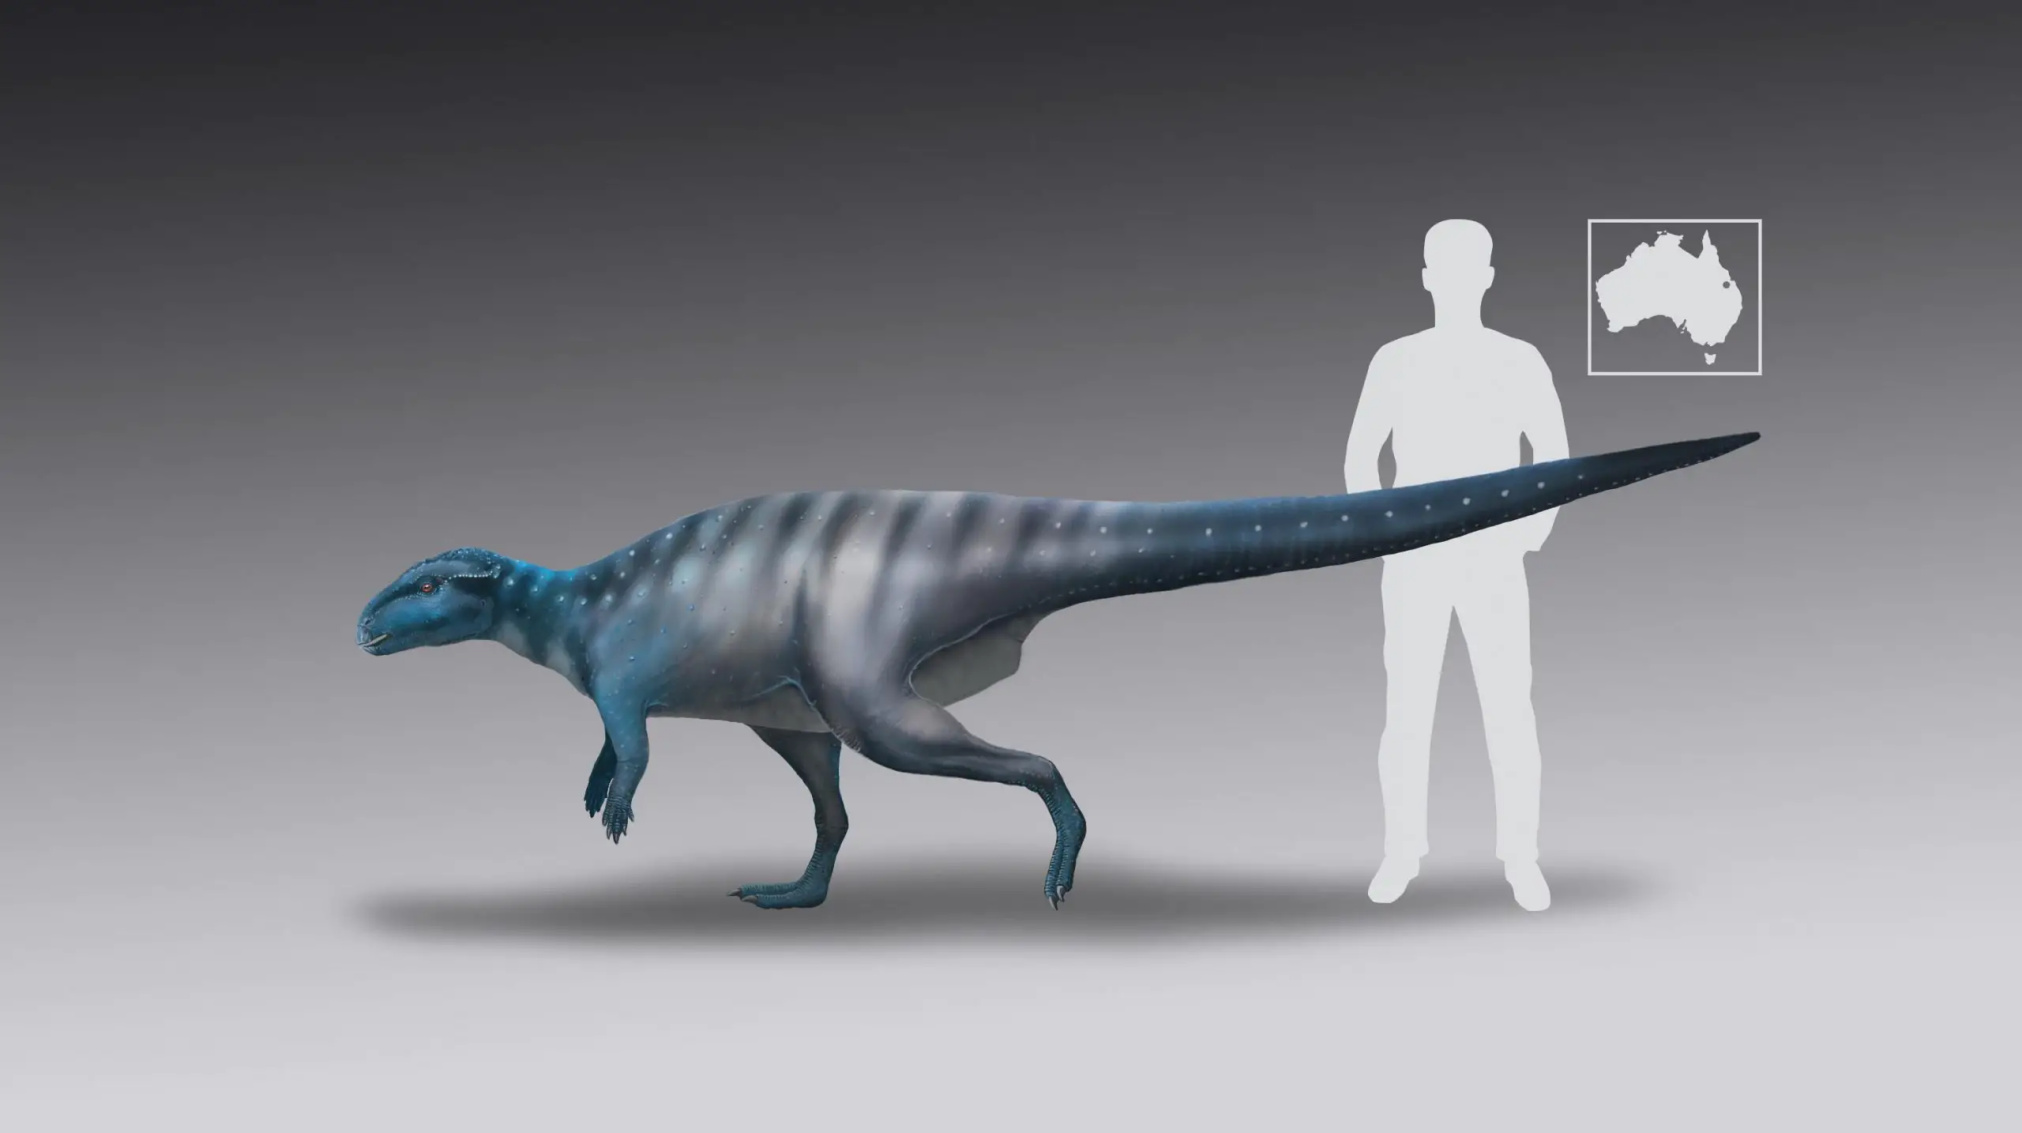 This is a life-reconstruction of the 200-million-year-old dinosaur track-maker from Mount Morgan. Credit: Dr. Anthony Romilio